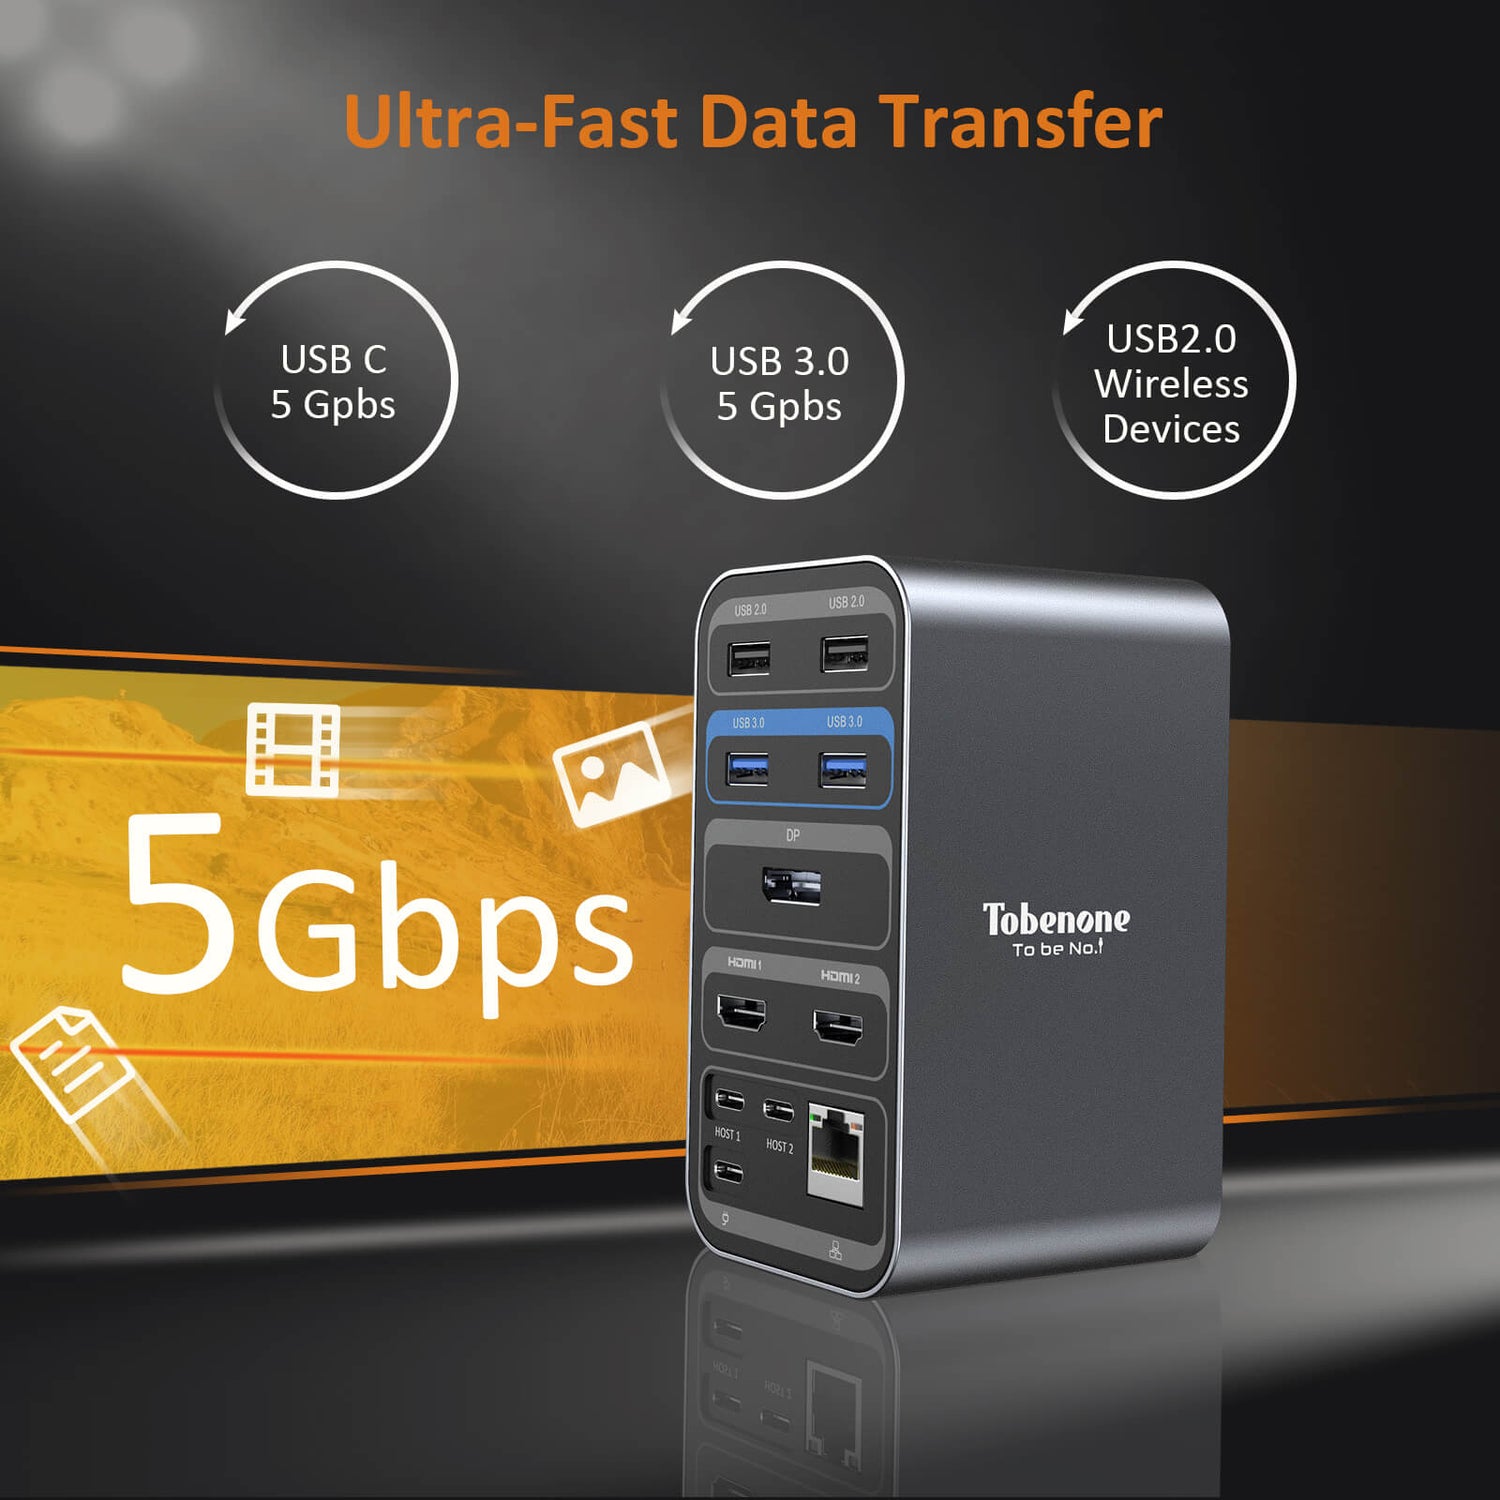 Ultra fast data transfer speed up to 5 Gbps